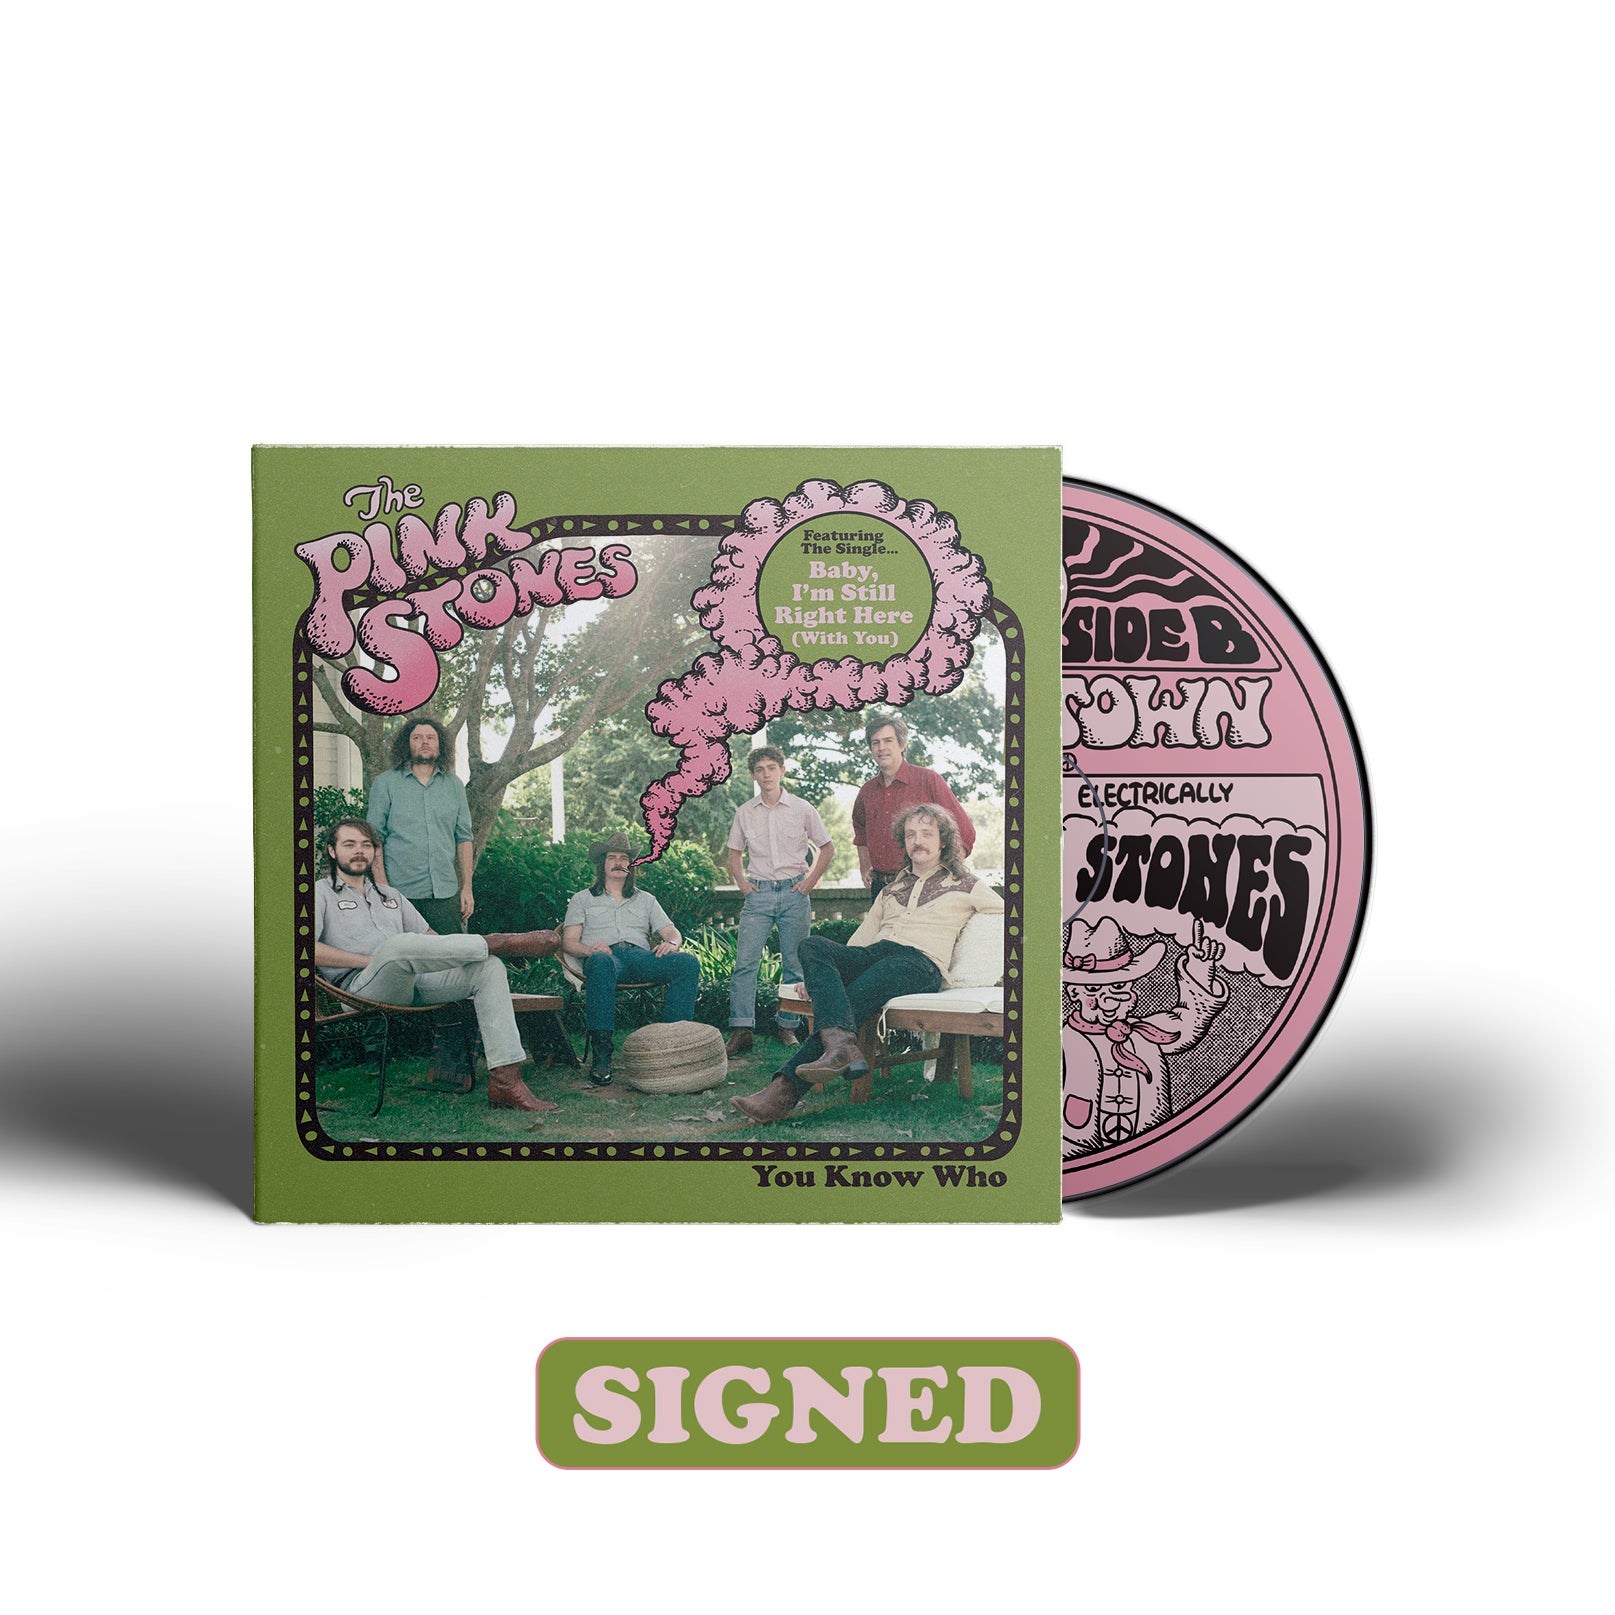 The Pink Stones - You Know Who [SIGNED CD]